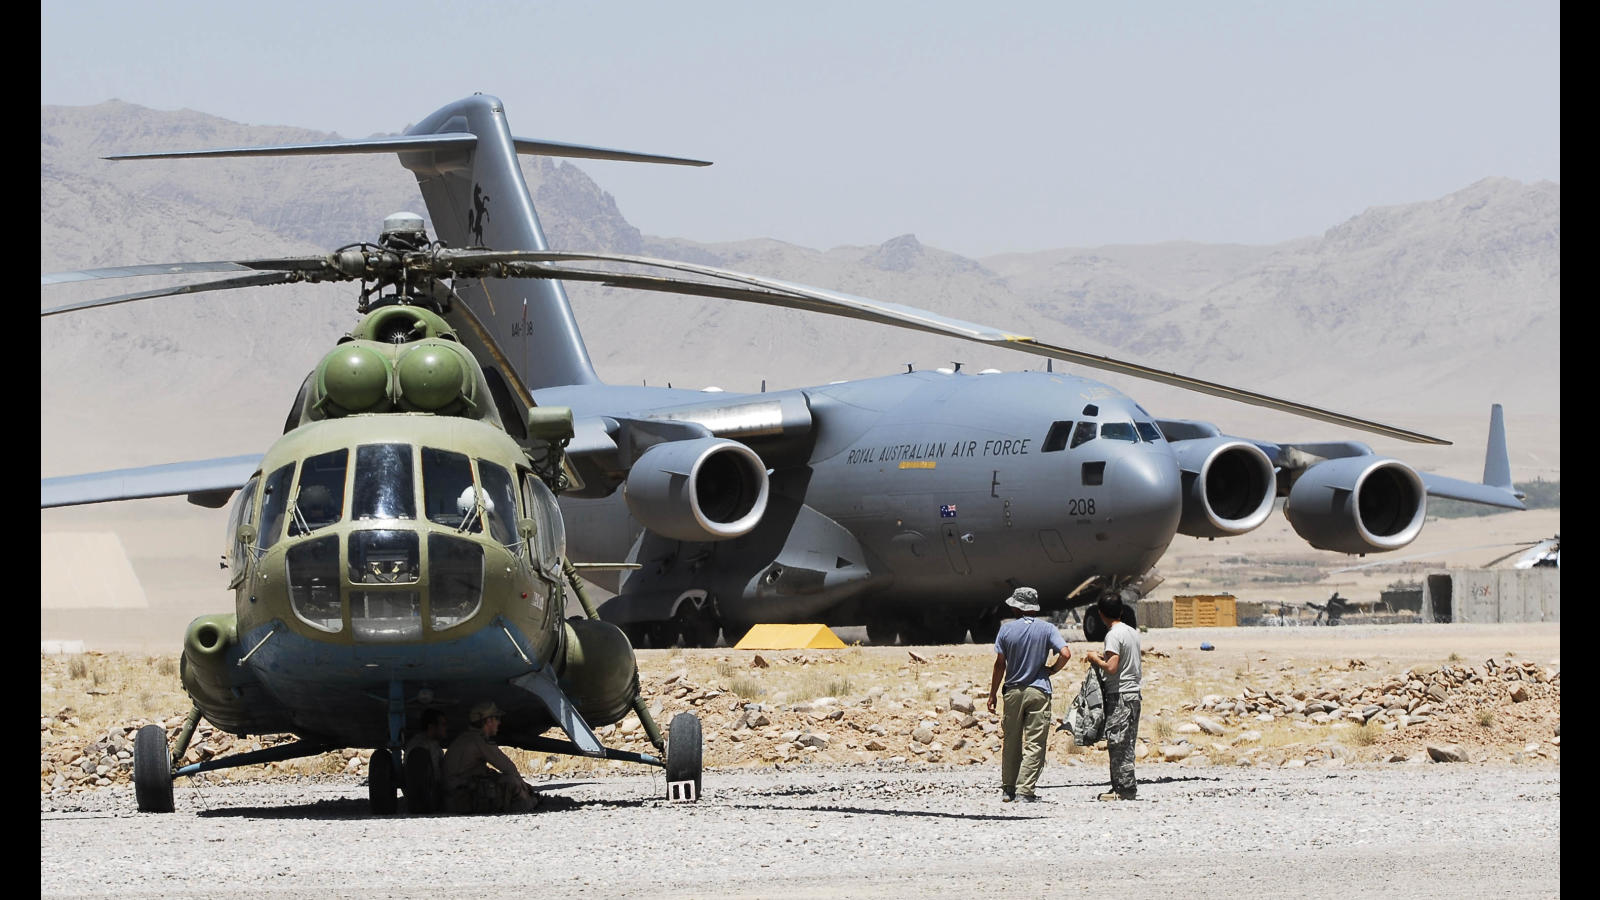 An Australian C-17 Globemaster looms large over a Russian made Mi-8 HIP helicopter on the dusty parking apron at Tarin Kowt in Afghanistan. Mid Caption: The Air Load Team is responsible for the safe and timely loading and unloading of cargo from Australian and Coalition aircraft in locations throughout the Operation Slipper area of operations. Operation SLIPPER is Australia's military contribution to coalition efforts against international terrorism. Under this operation our forces contribute to the efforts of the North Atlantic Treaty Organisation (NATO) - led International Security Assistance Force in Afghanistan, aimed at preventing Afghanistan again becoming a safe haven for international terrorists, and the United States-led International Coalition Against Terrorism (ICAT) efforts in the broader Middle East.